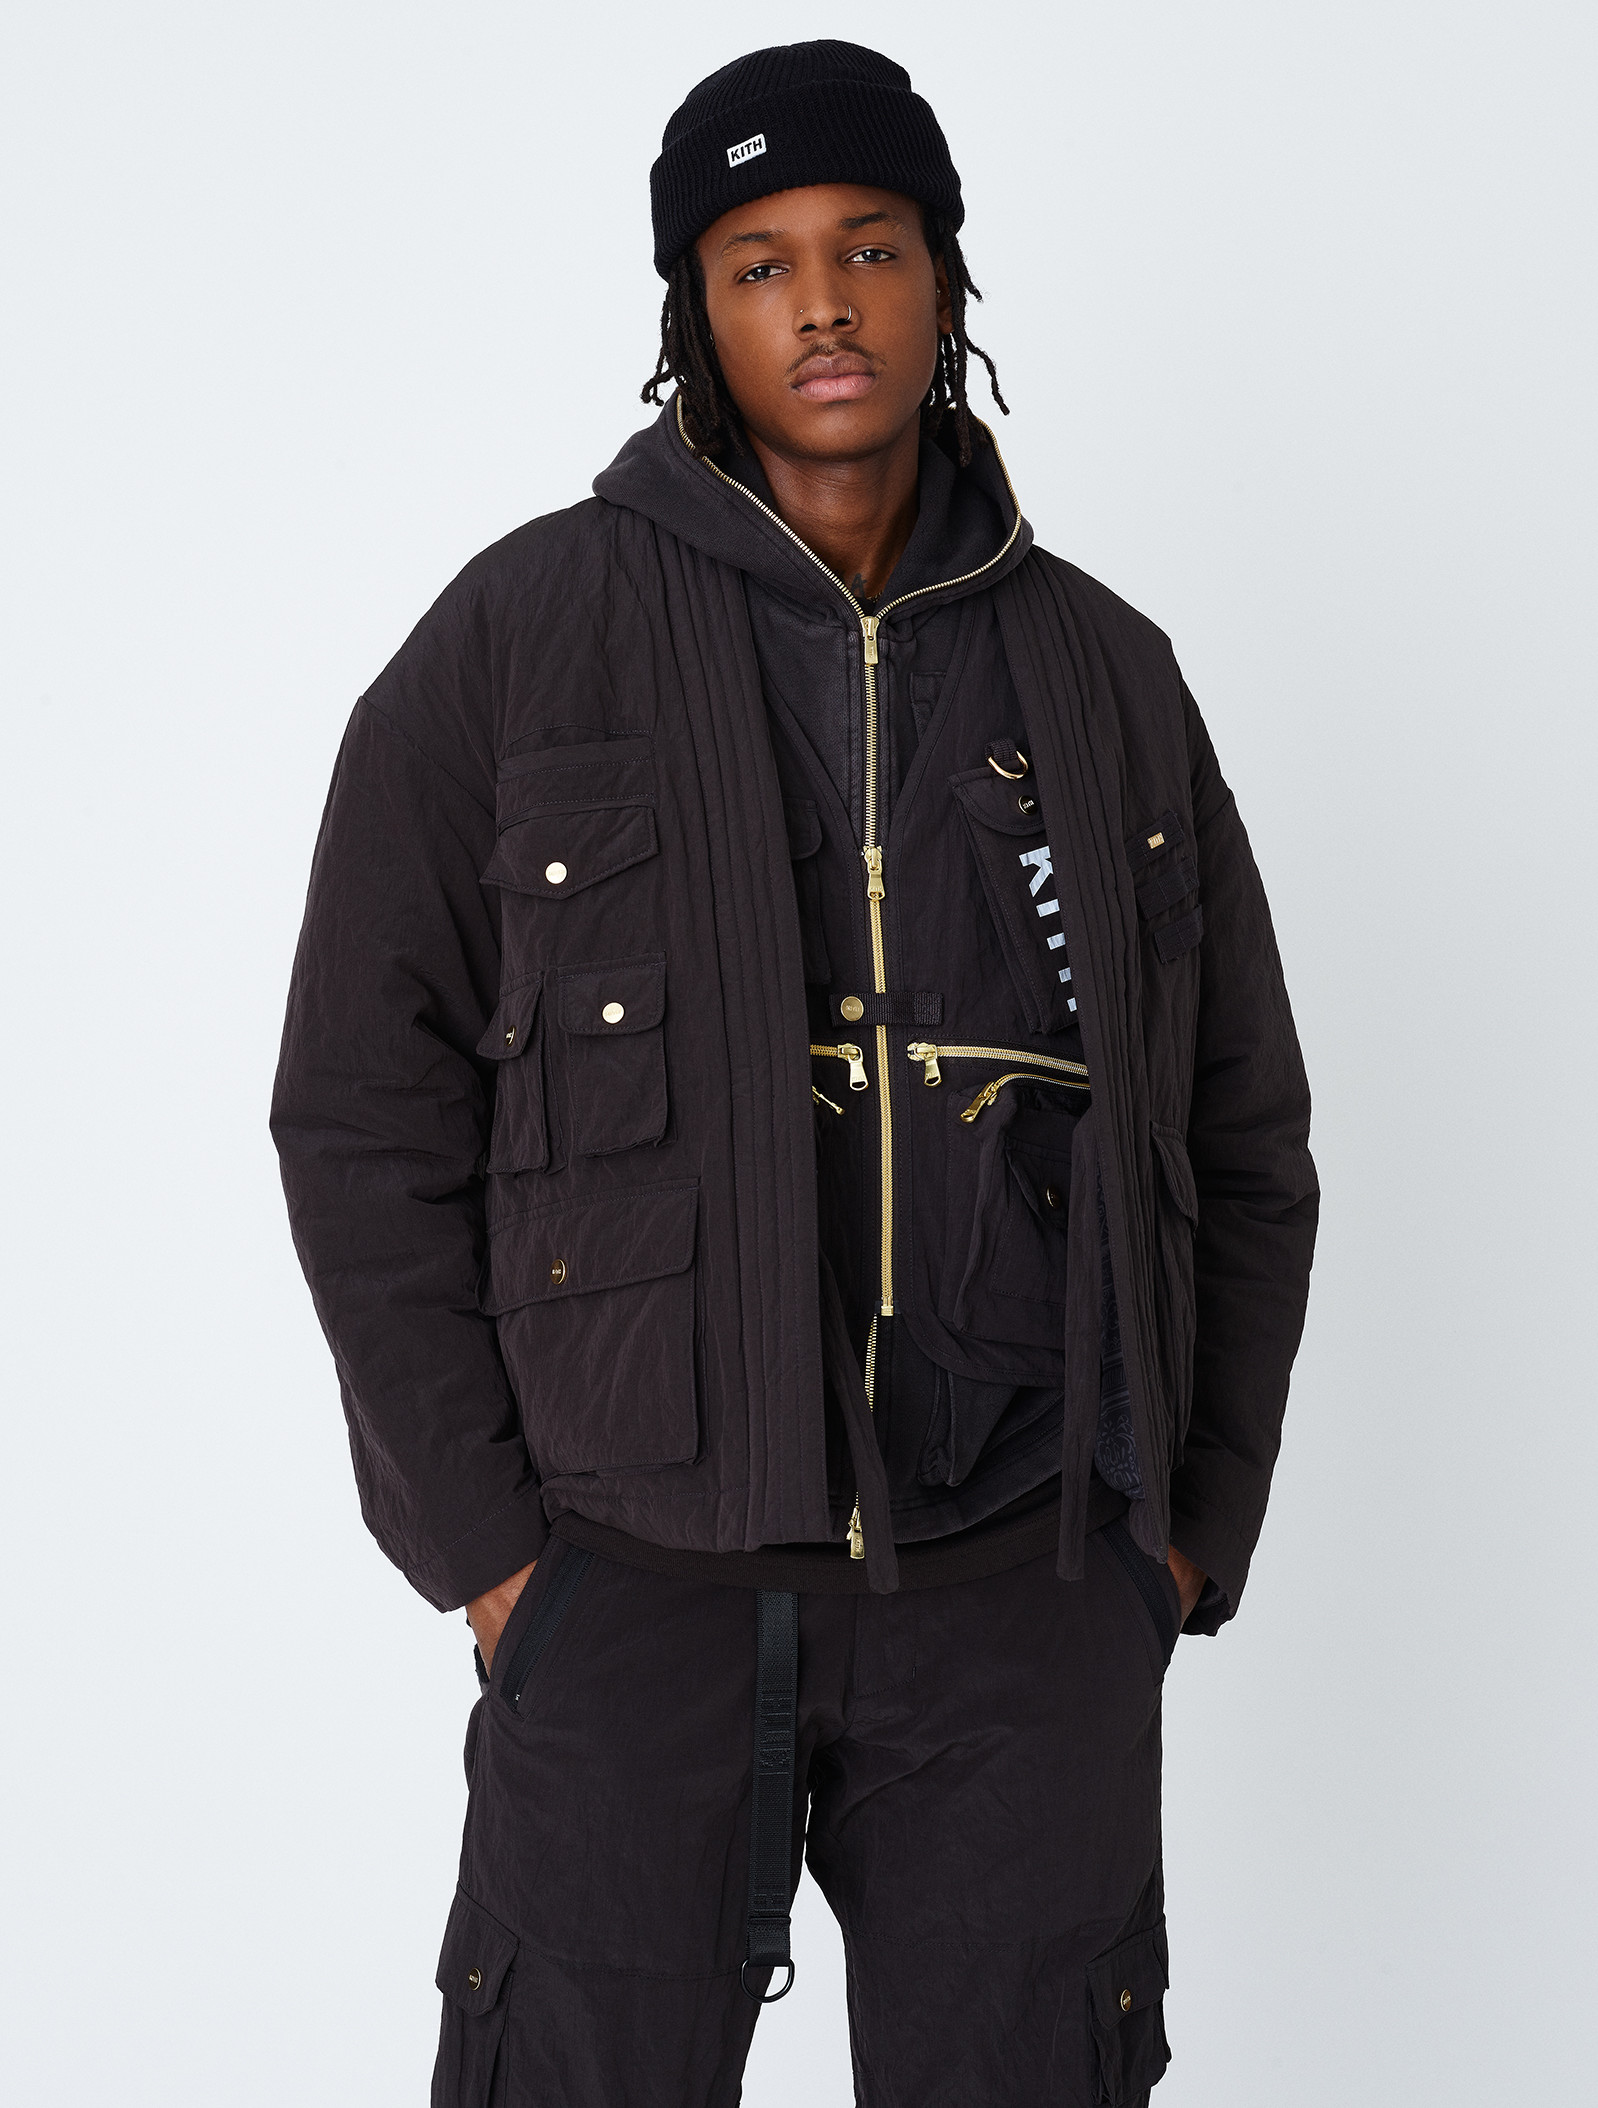 Kith Spring 2019 Collection, Delivery 1